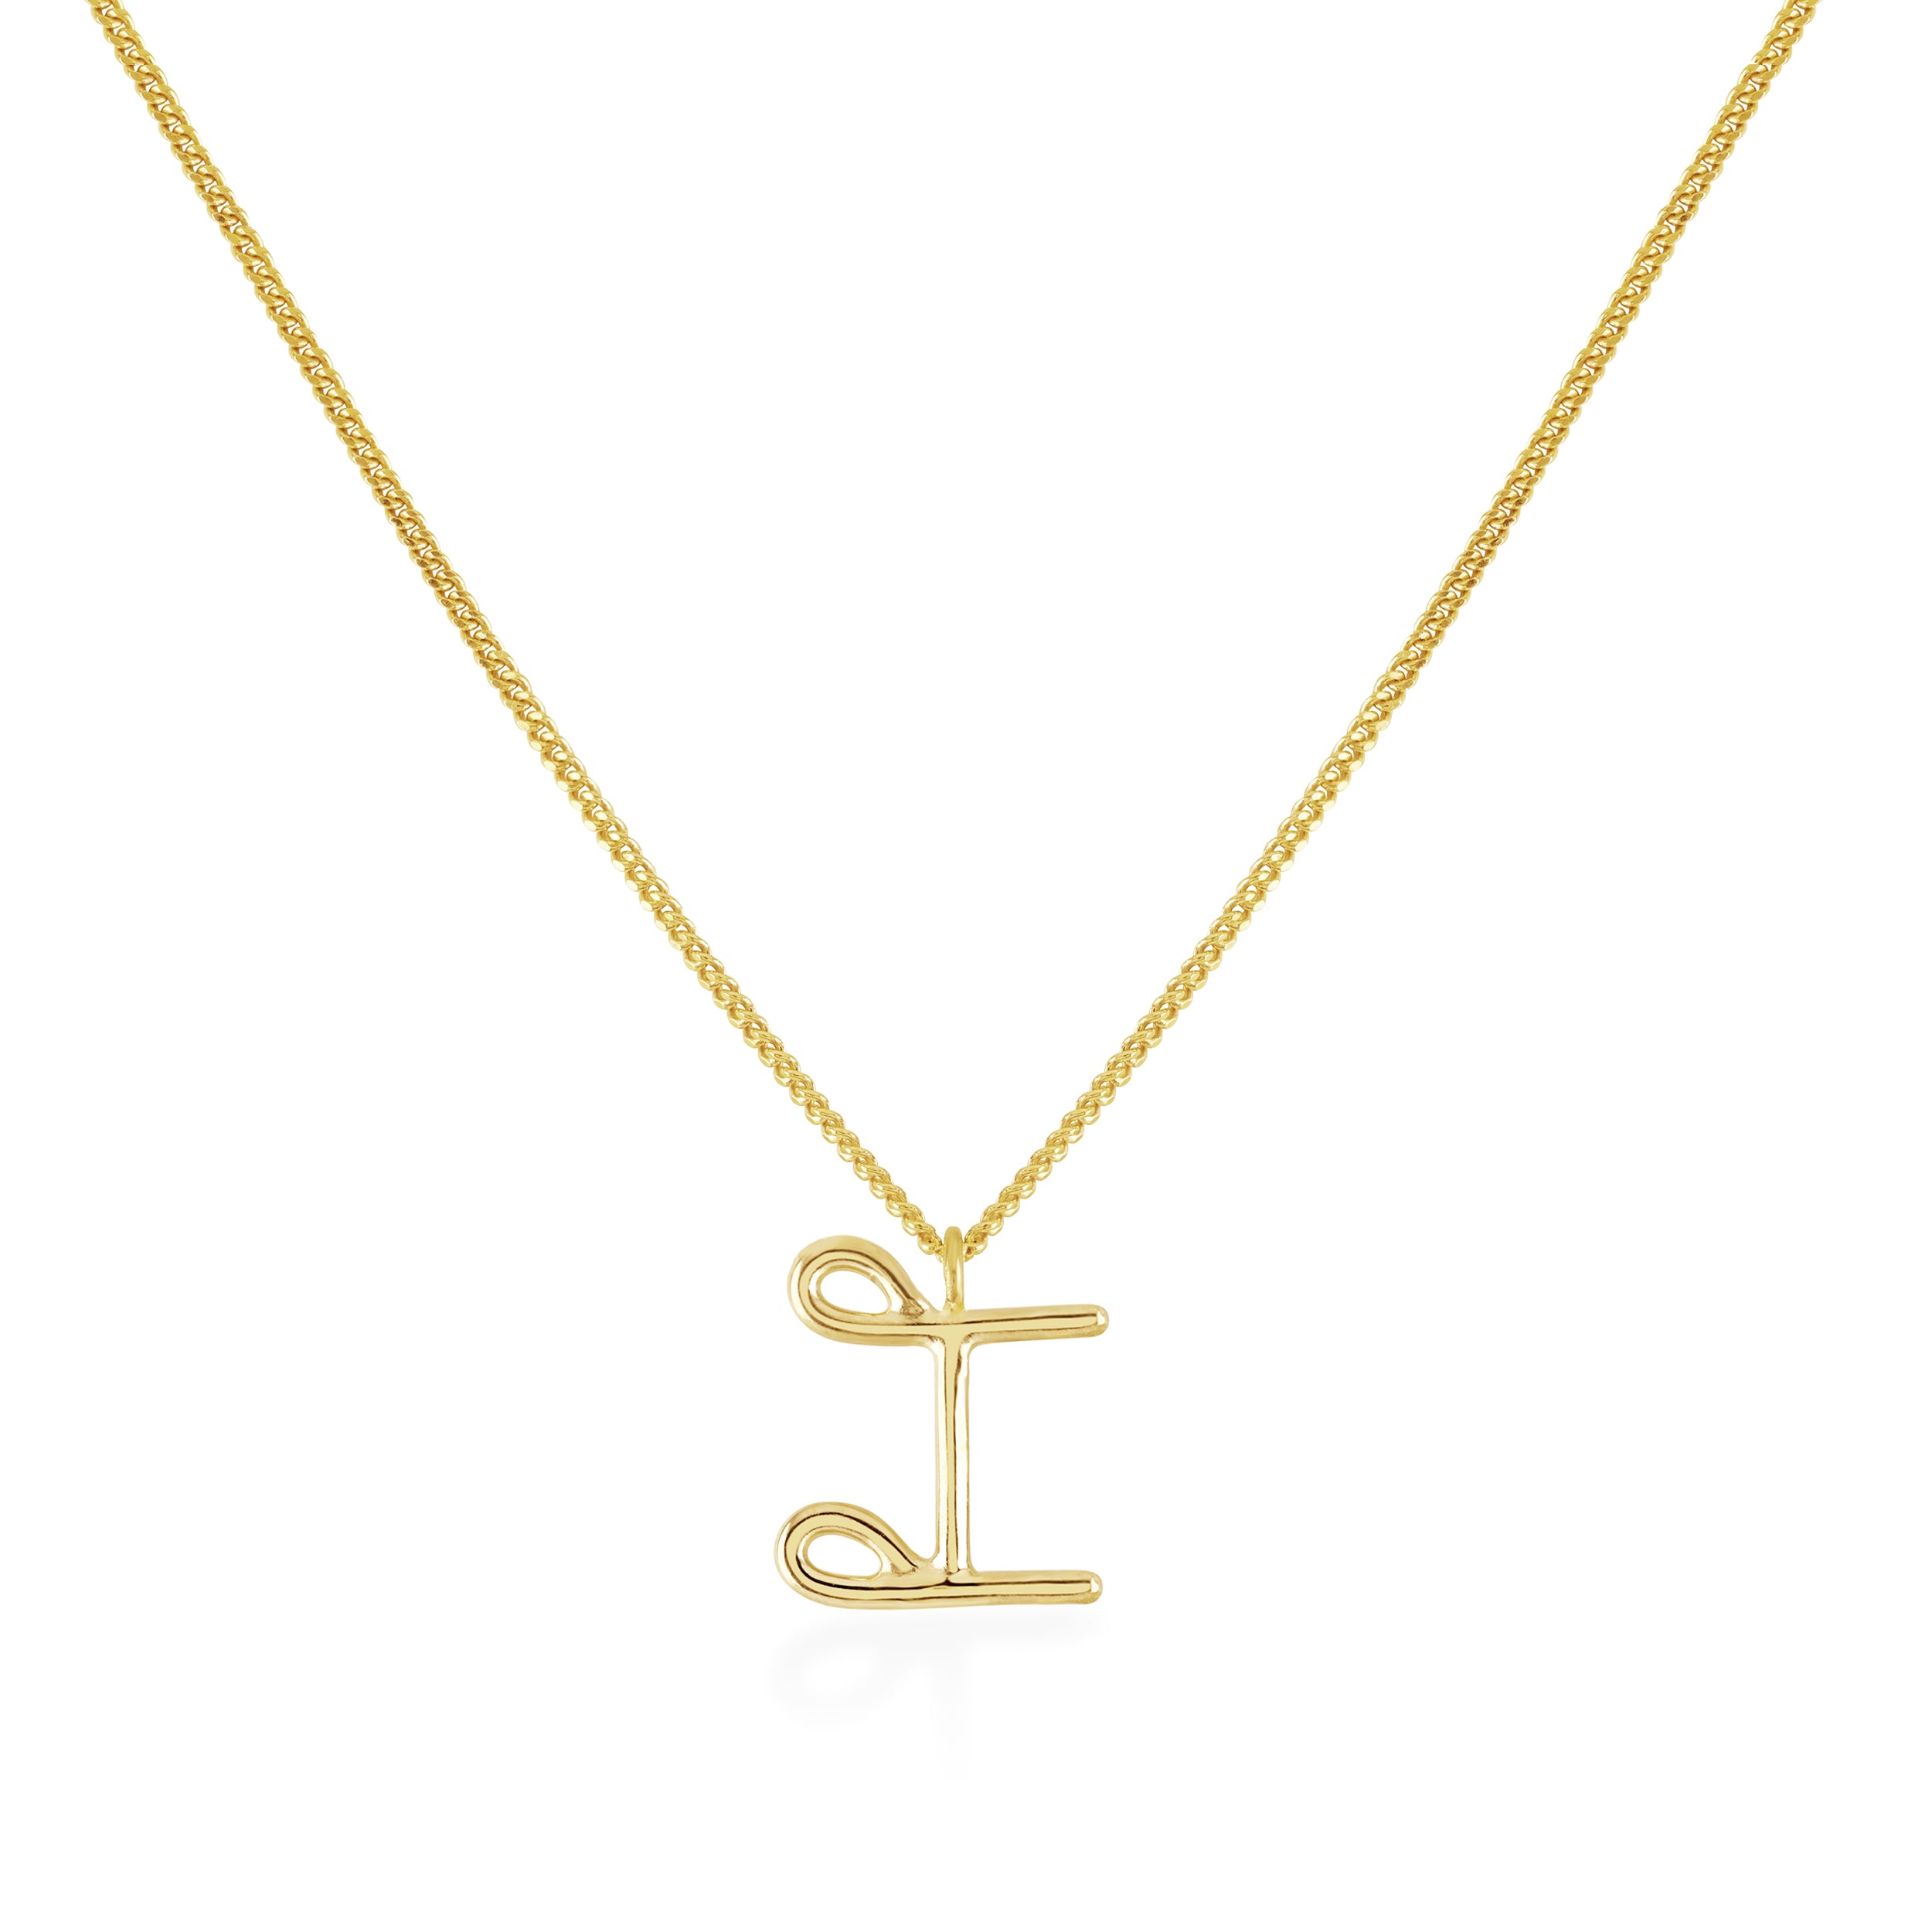 Personalized 5 Letter Necklace in 14k Gold (Double Spacing)